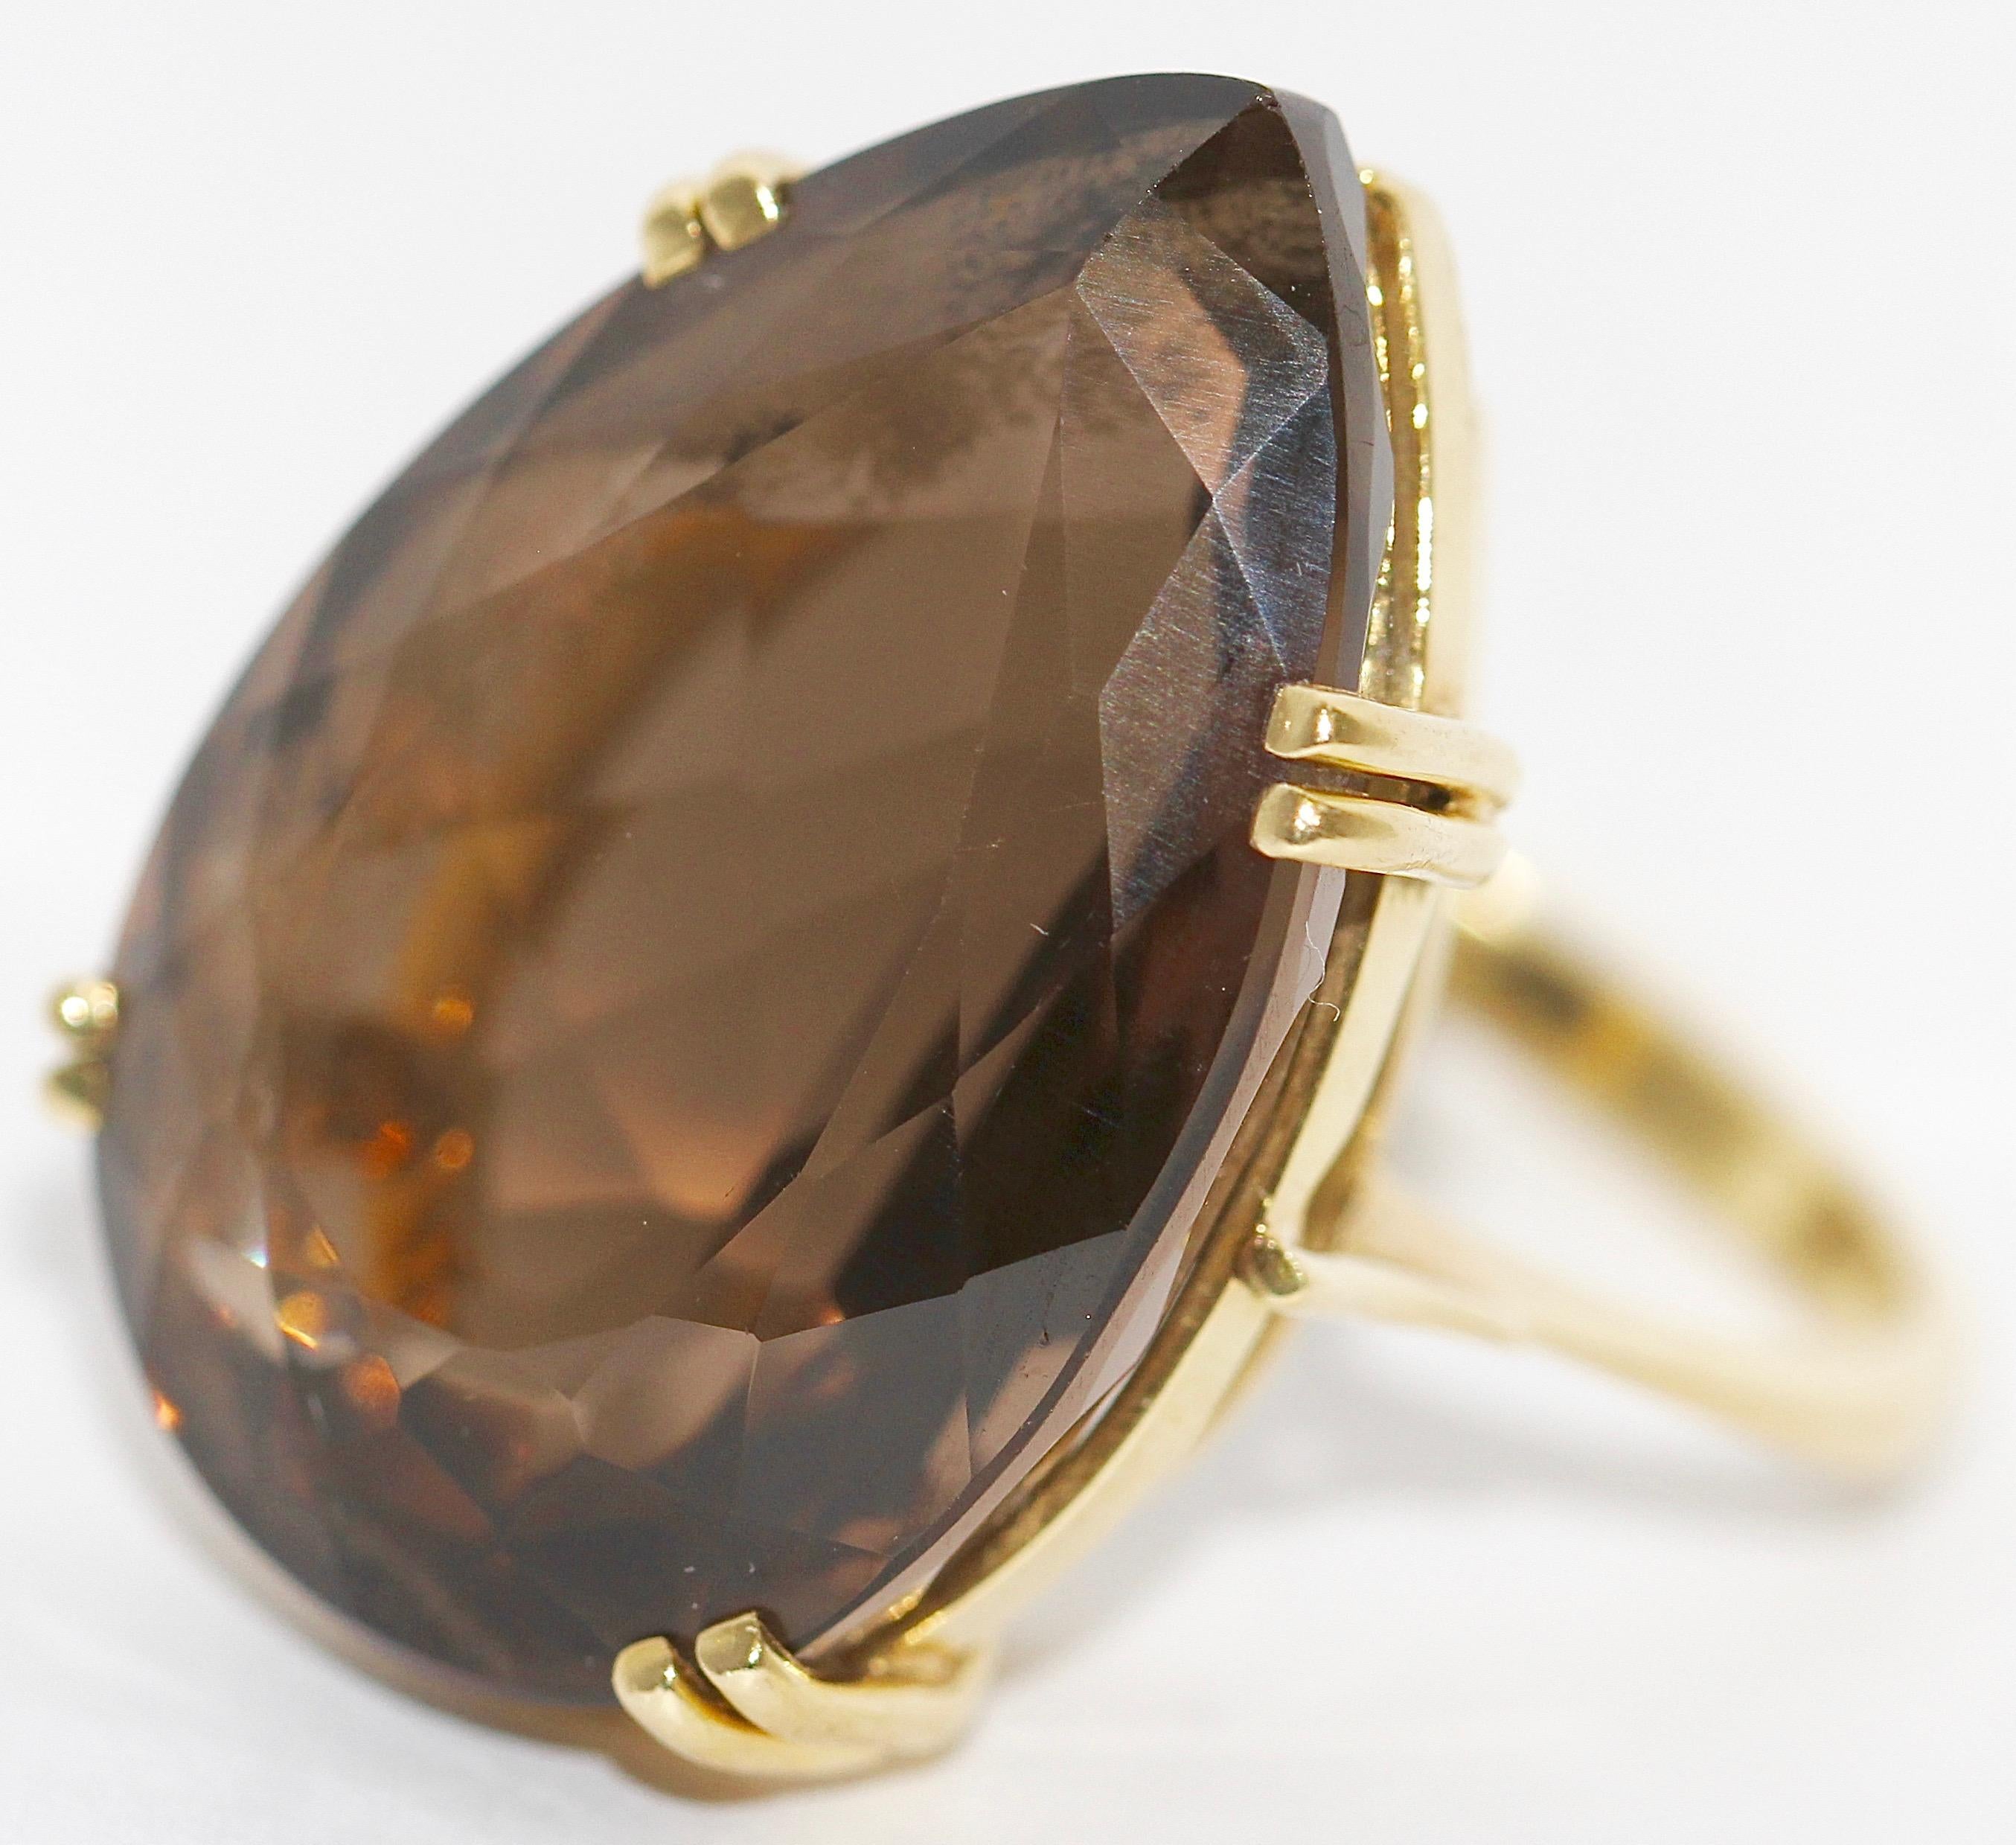 Pear Cut 18 Karat Gold Ring with Large, Faceted Smoky Quartz, Topaz in Heart Shape